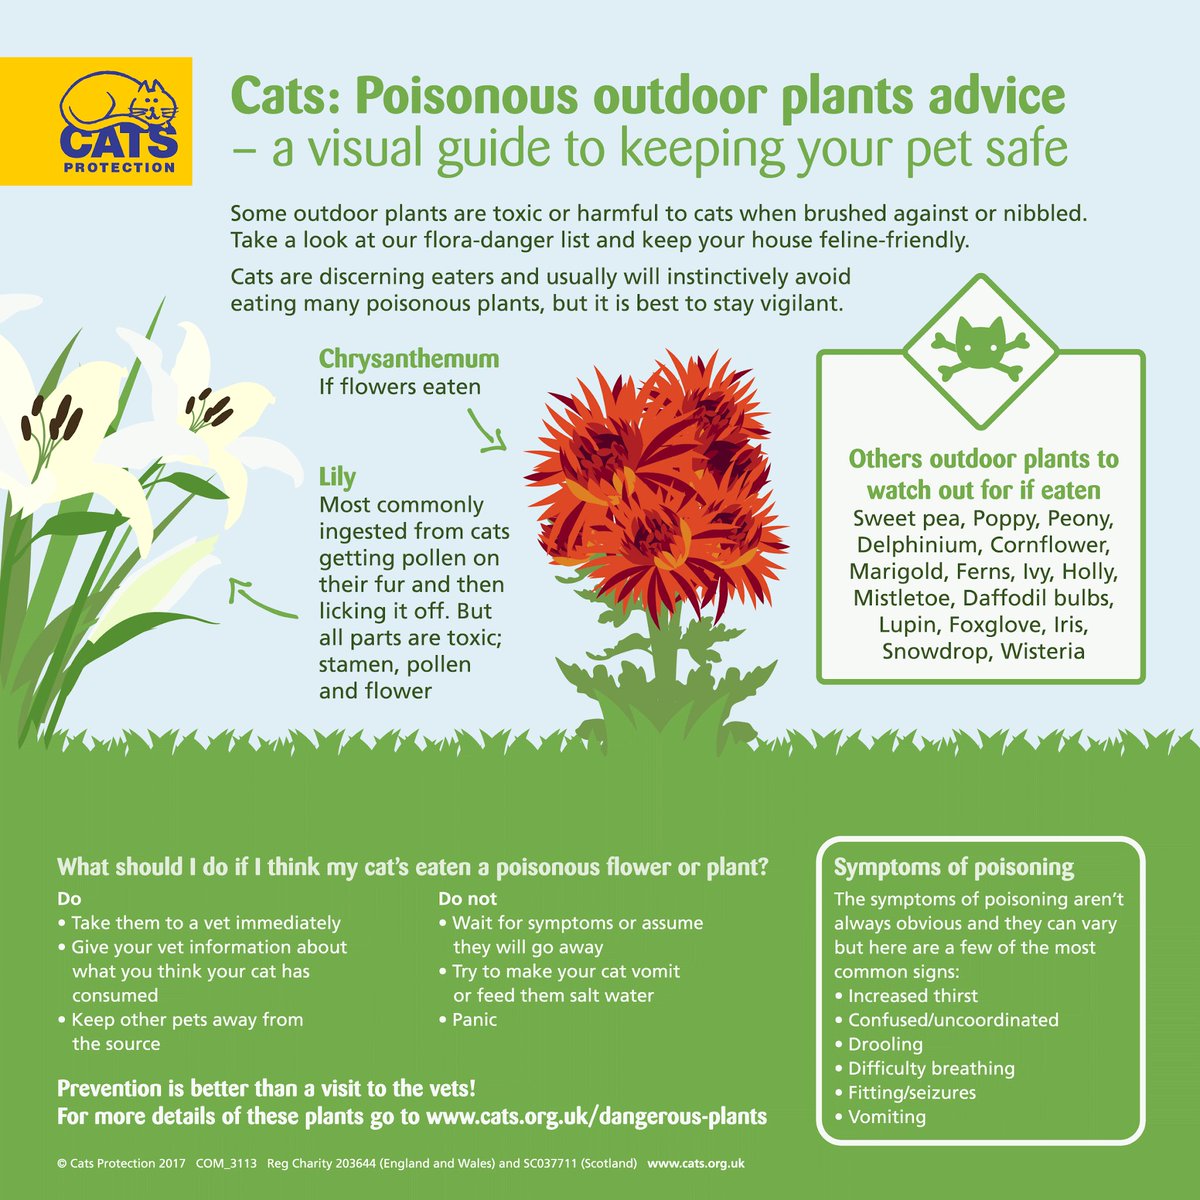 Today is #NationalGardeningDay🌻 Gardening season is getting underway and we want to give our green-thumb followers a heads up towards having a cat safe garden🌹 Please follow the link for a list of cat safe plants 🌱 cats.org.uk/media/9598/cat… #CatsOnTwitter #CatsOnX